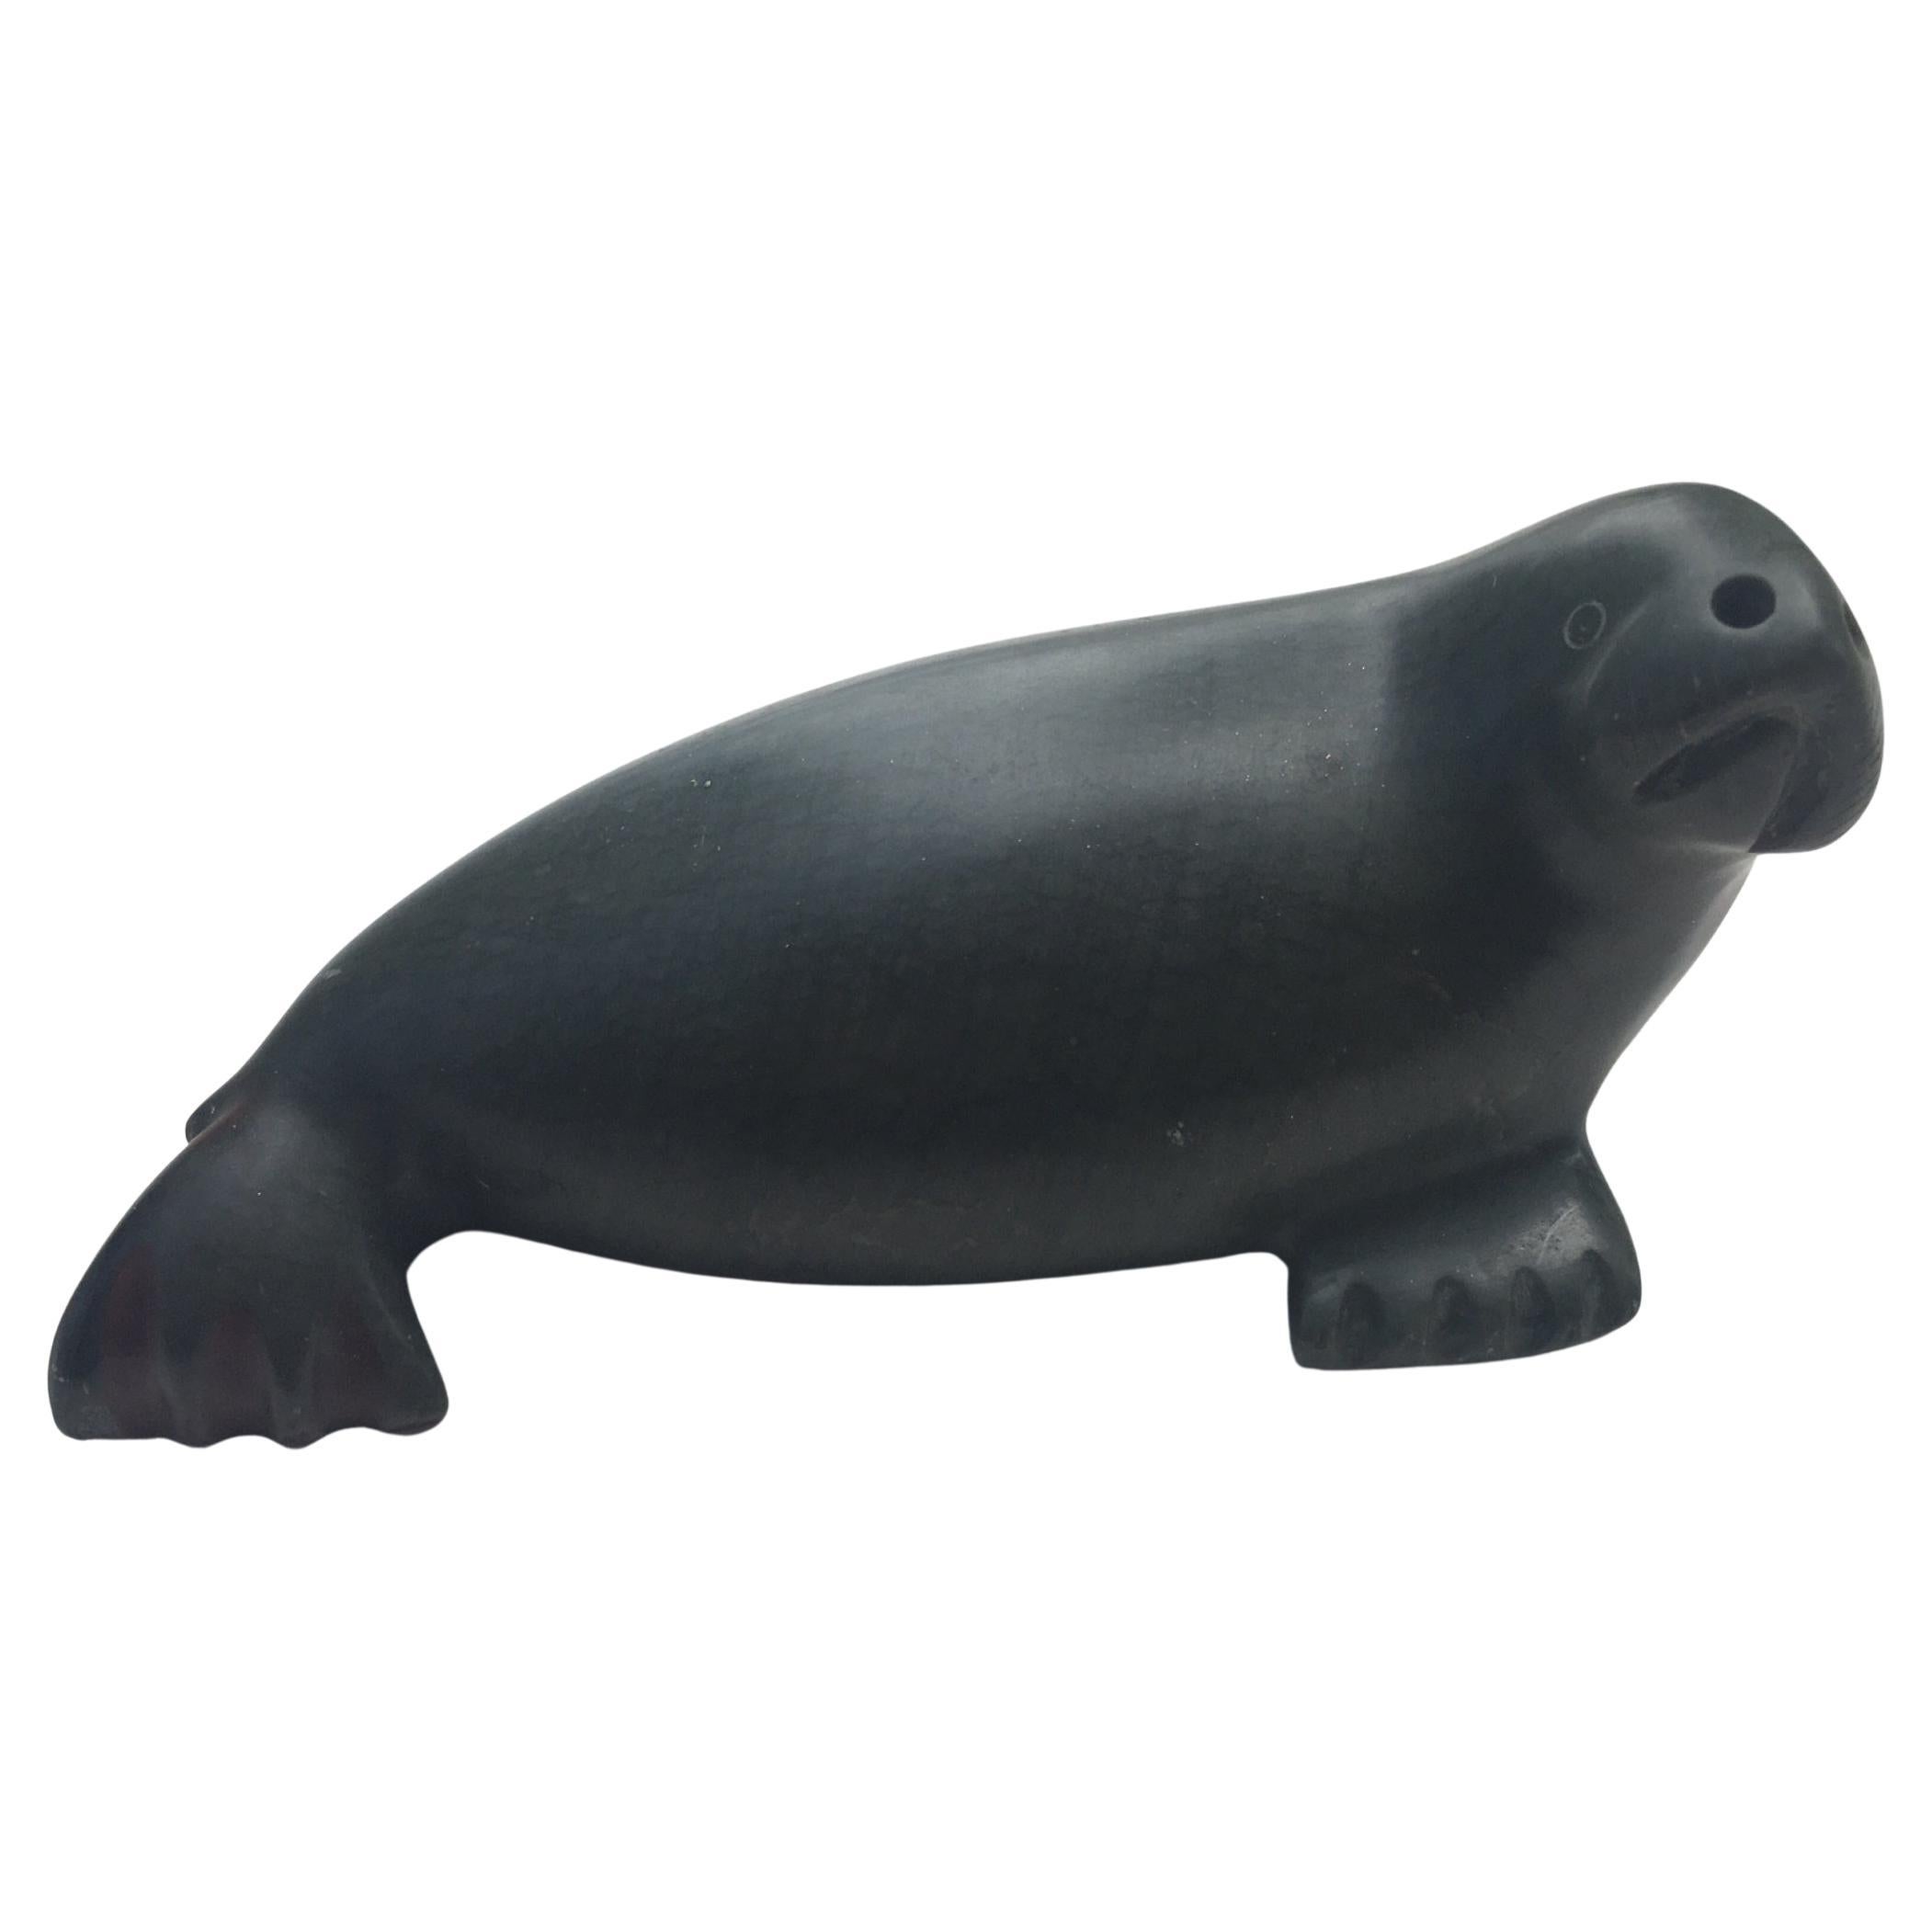 Inuit Stone Seal Sculpture Carving by Pauta Saila 1916 - 2009